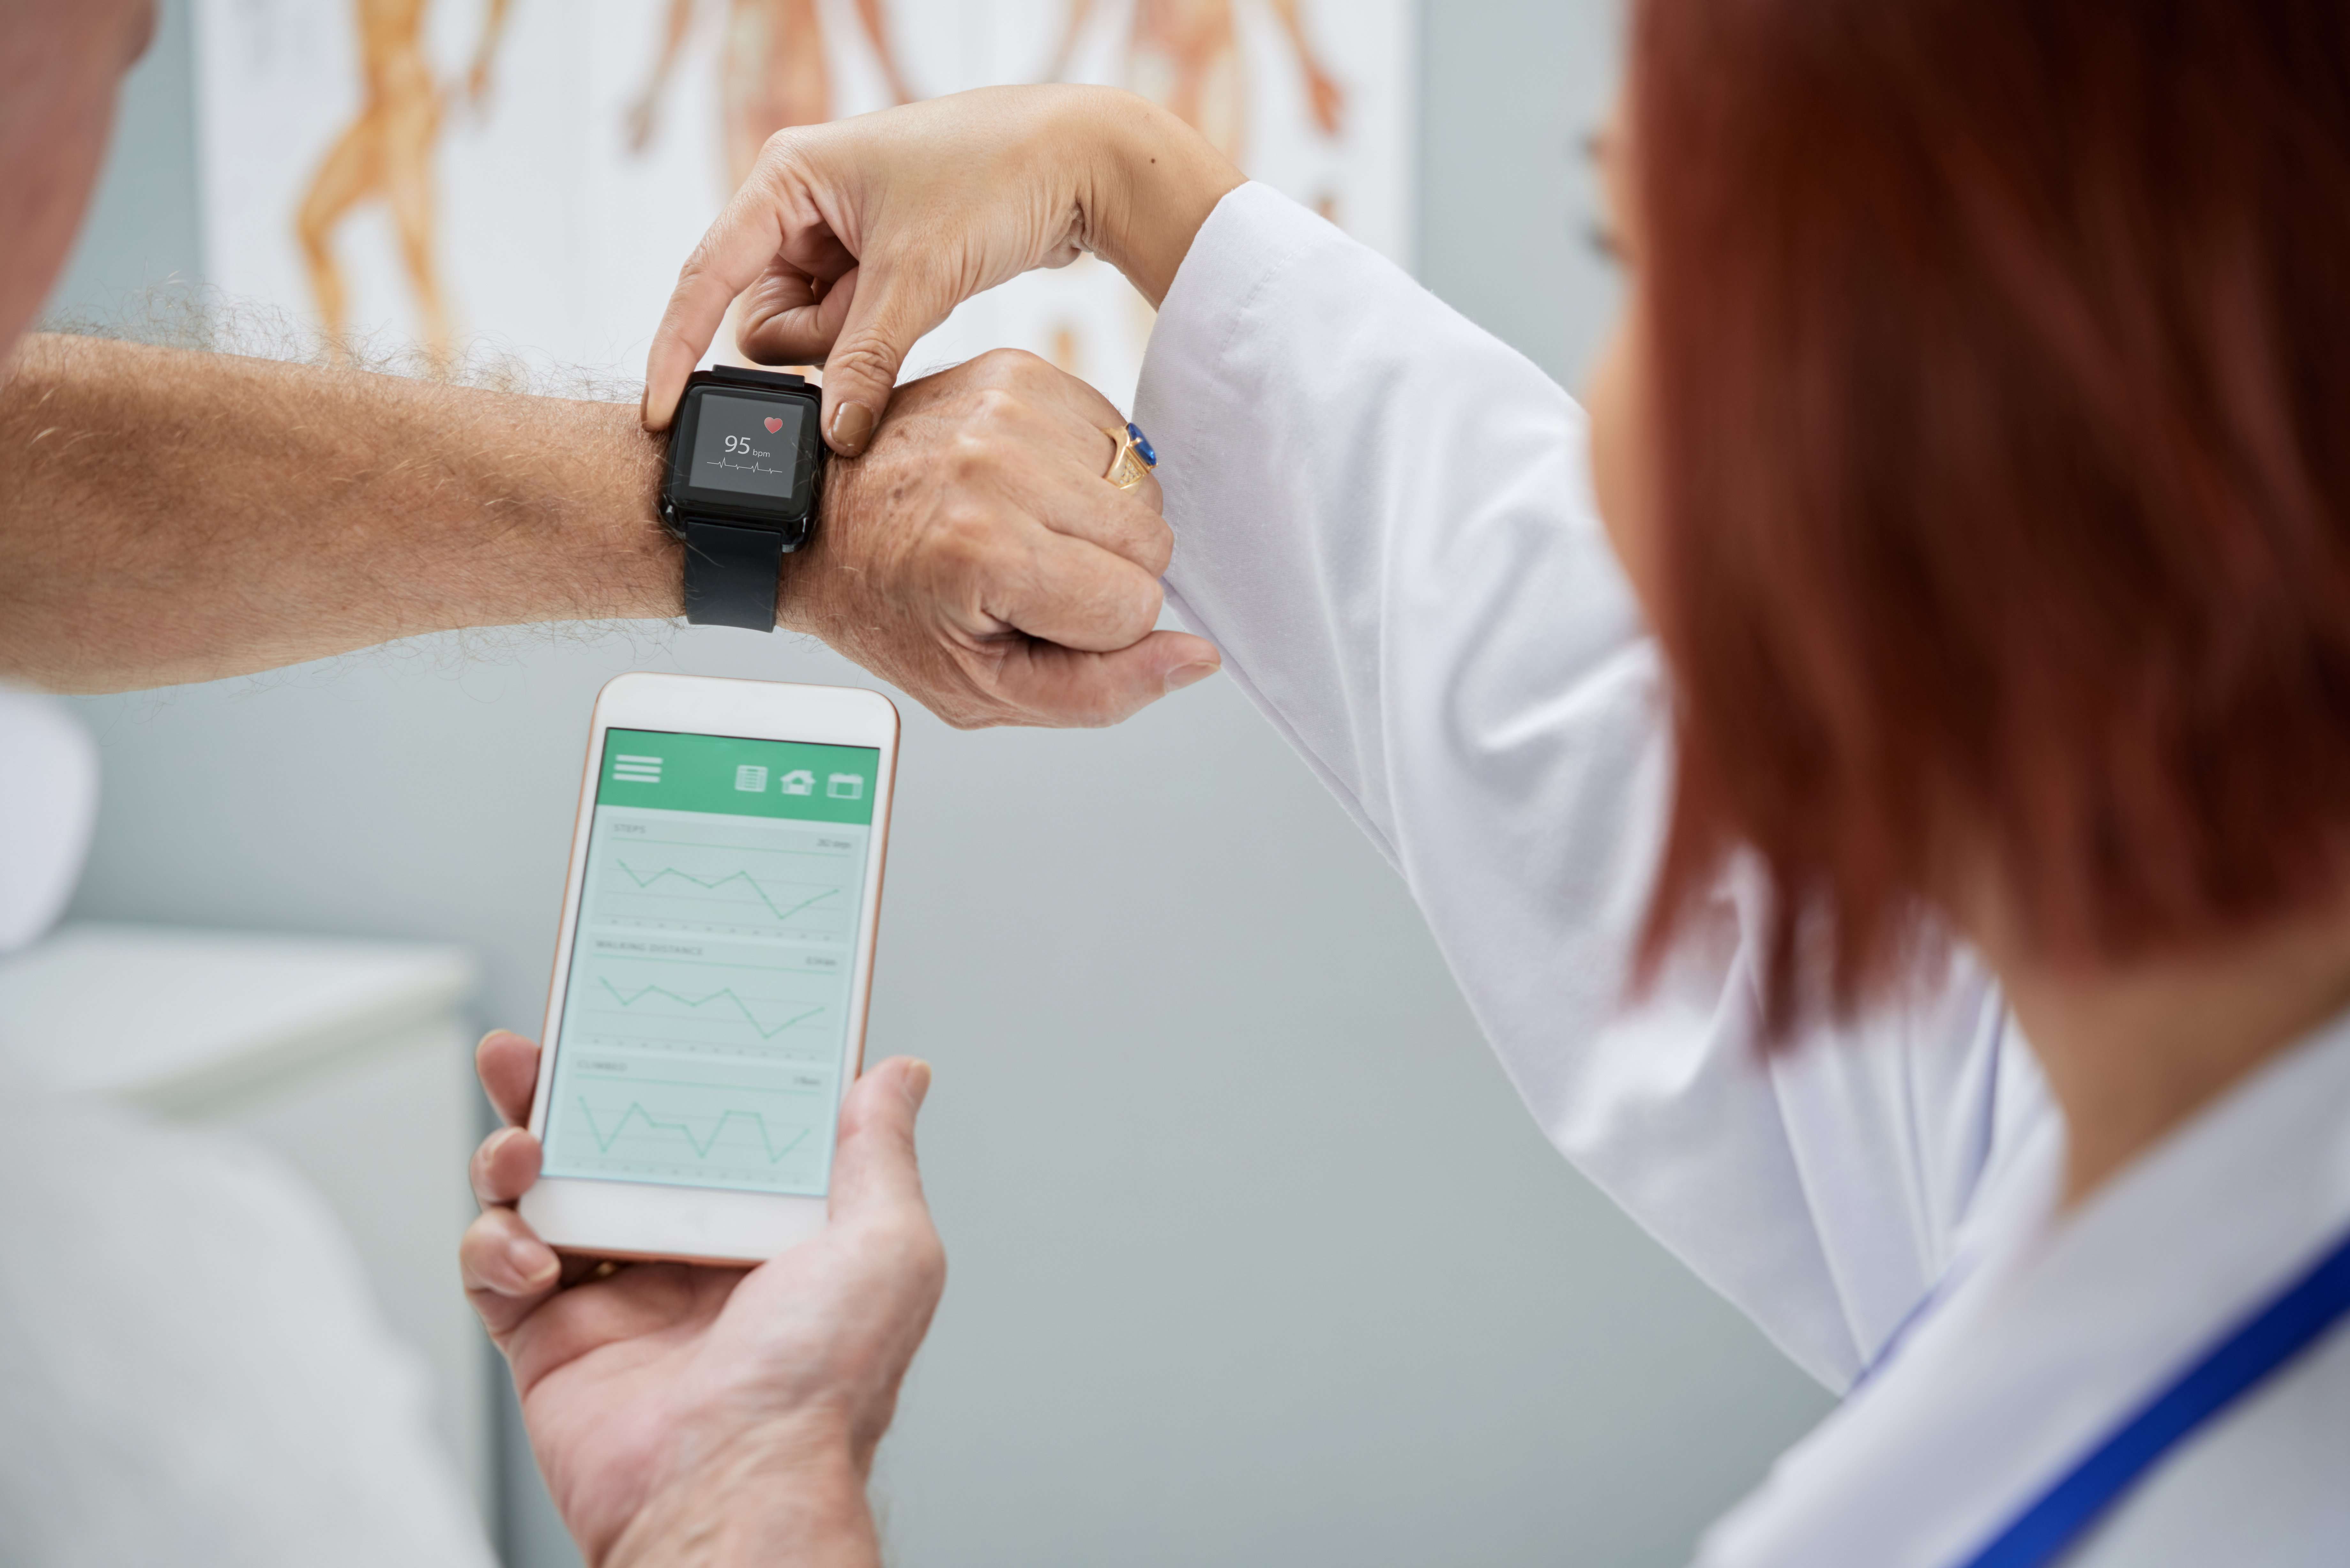 Use of digital health activity trackers linked to better medication adherence: study